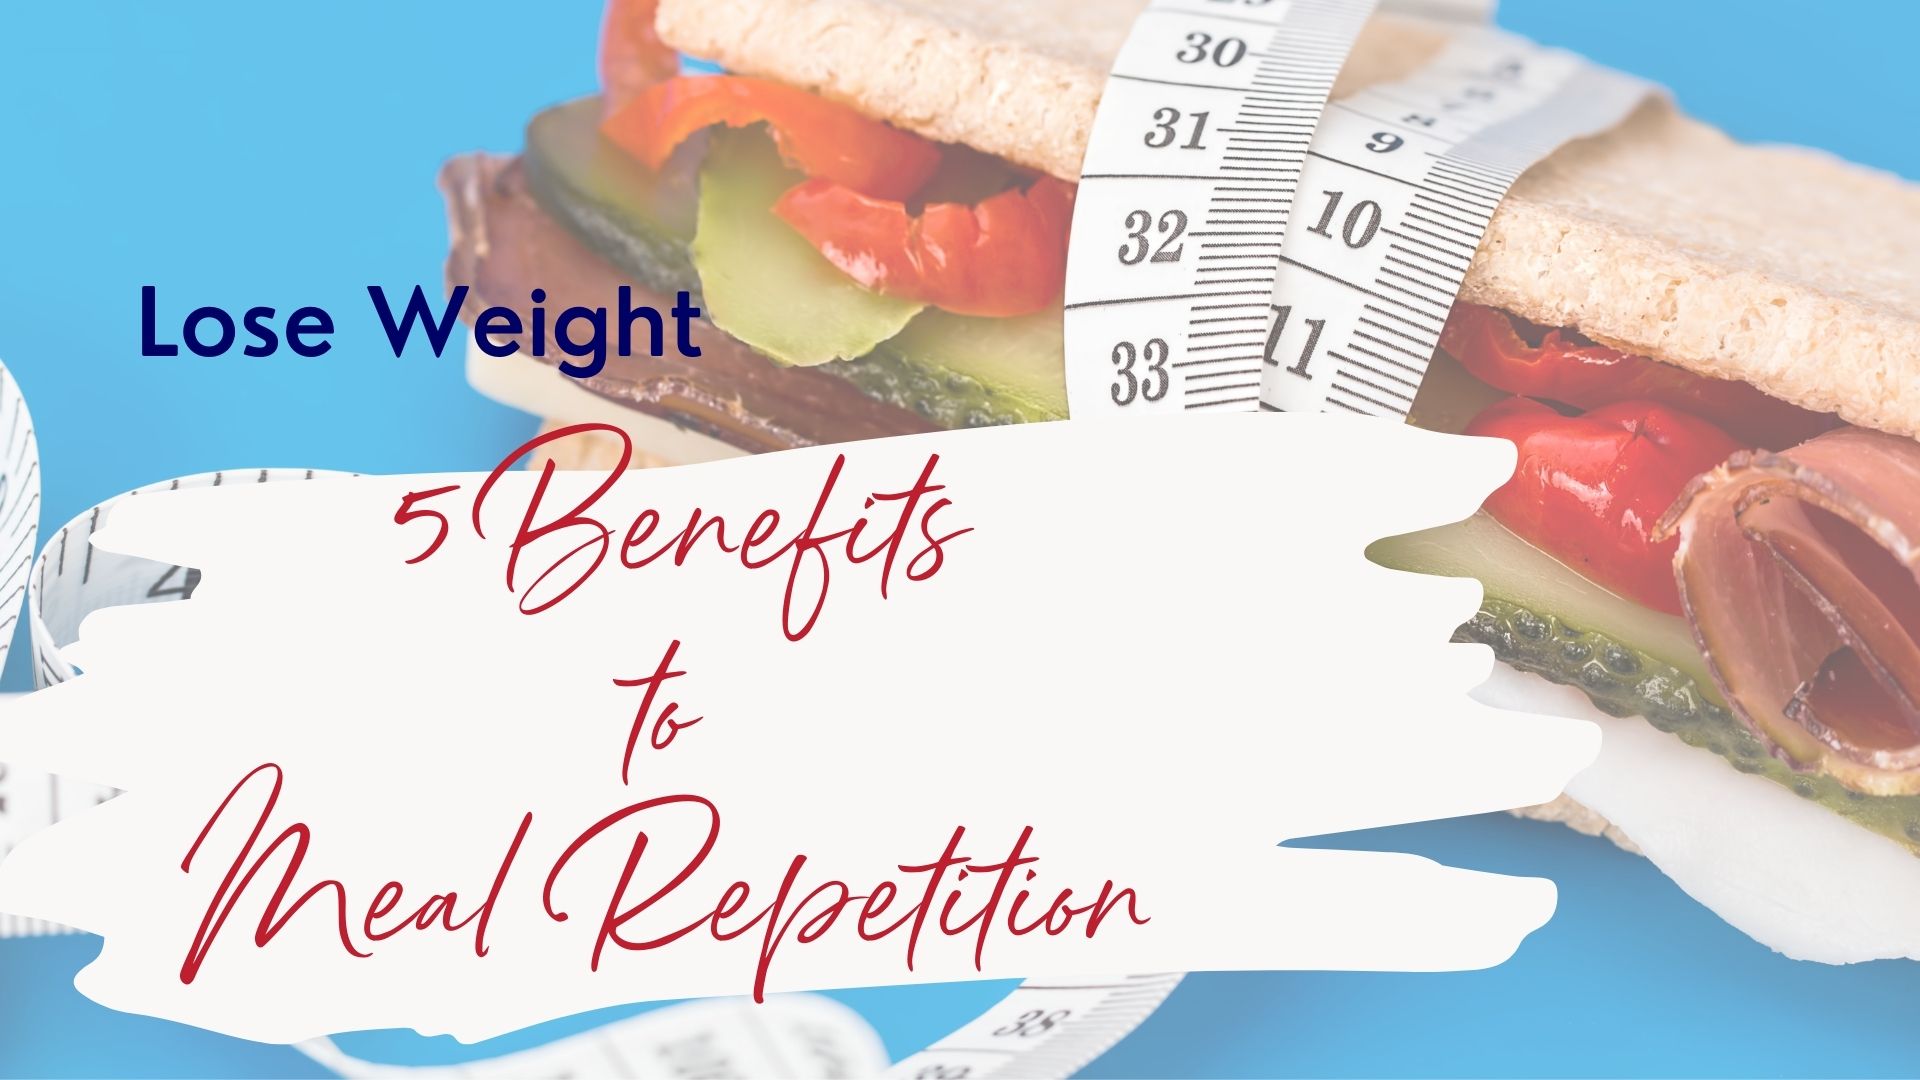 Lose Weight: 5 Benefits of Meal Repetition